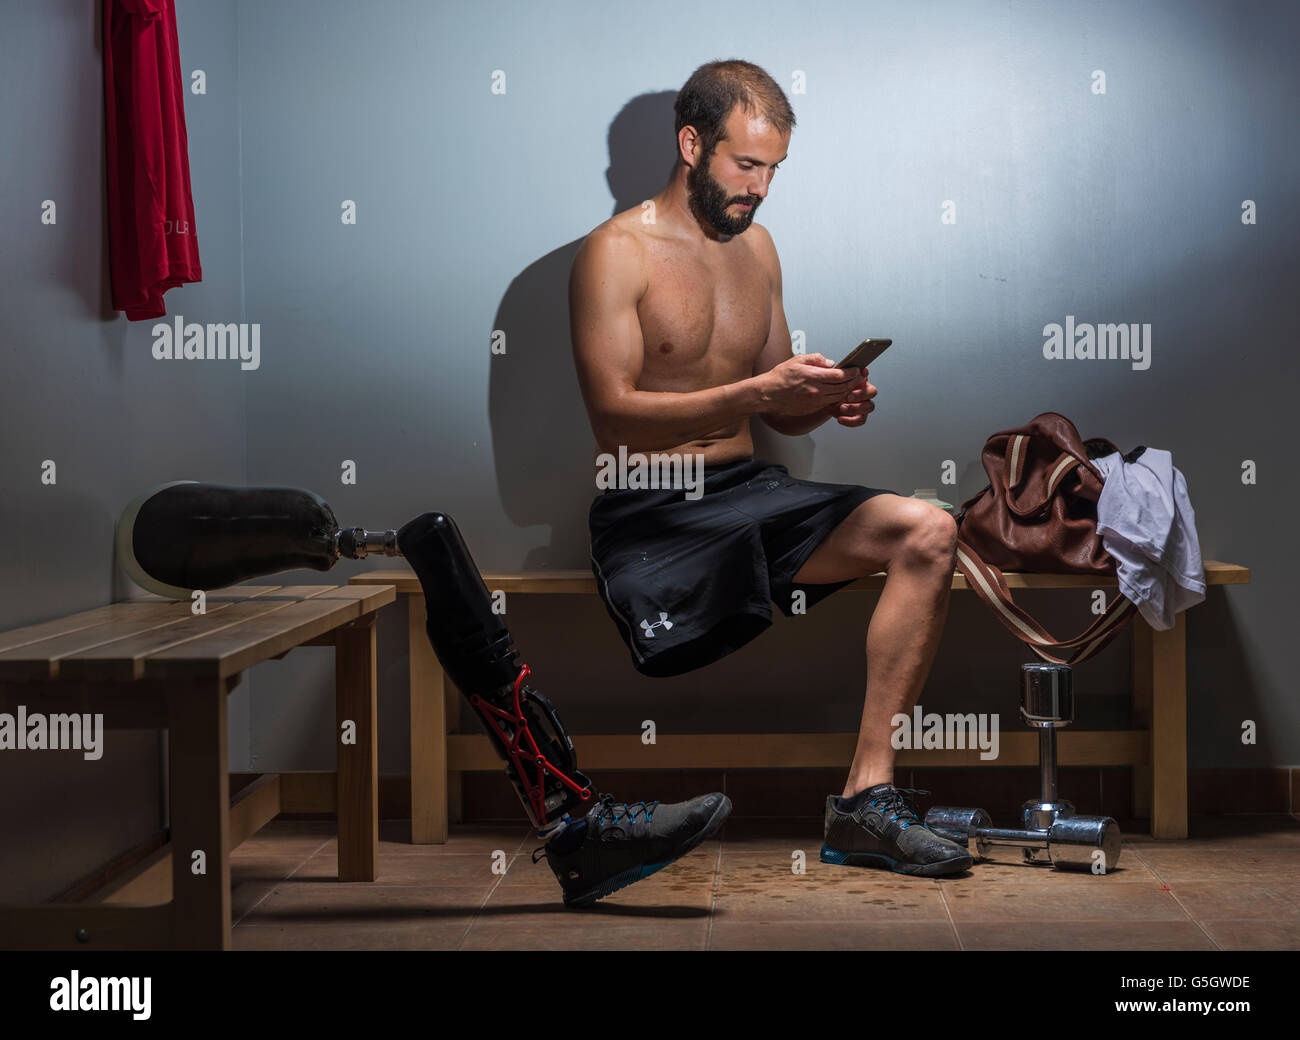 Man with a prosthesis in the gym locker room. Stock Photo